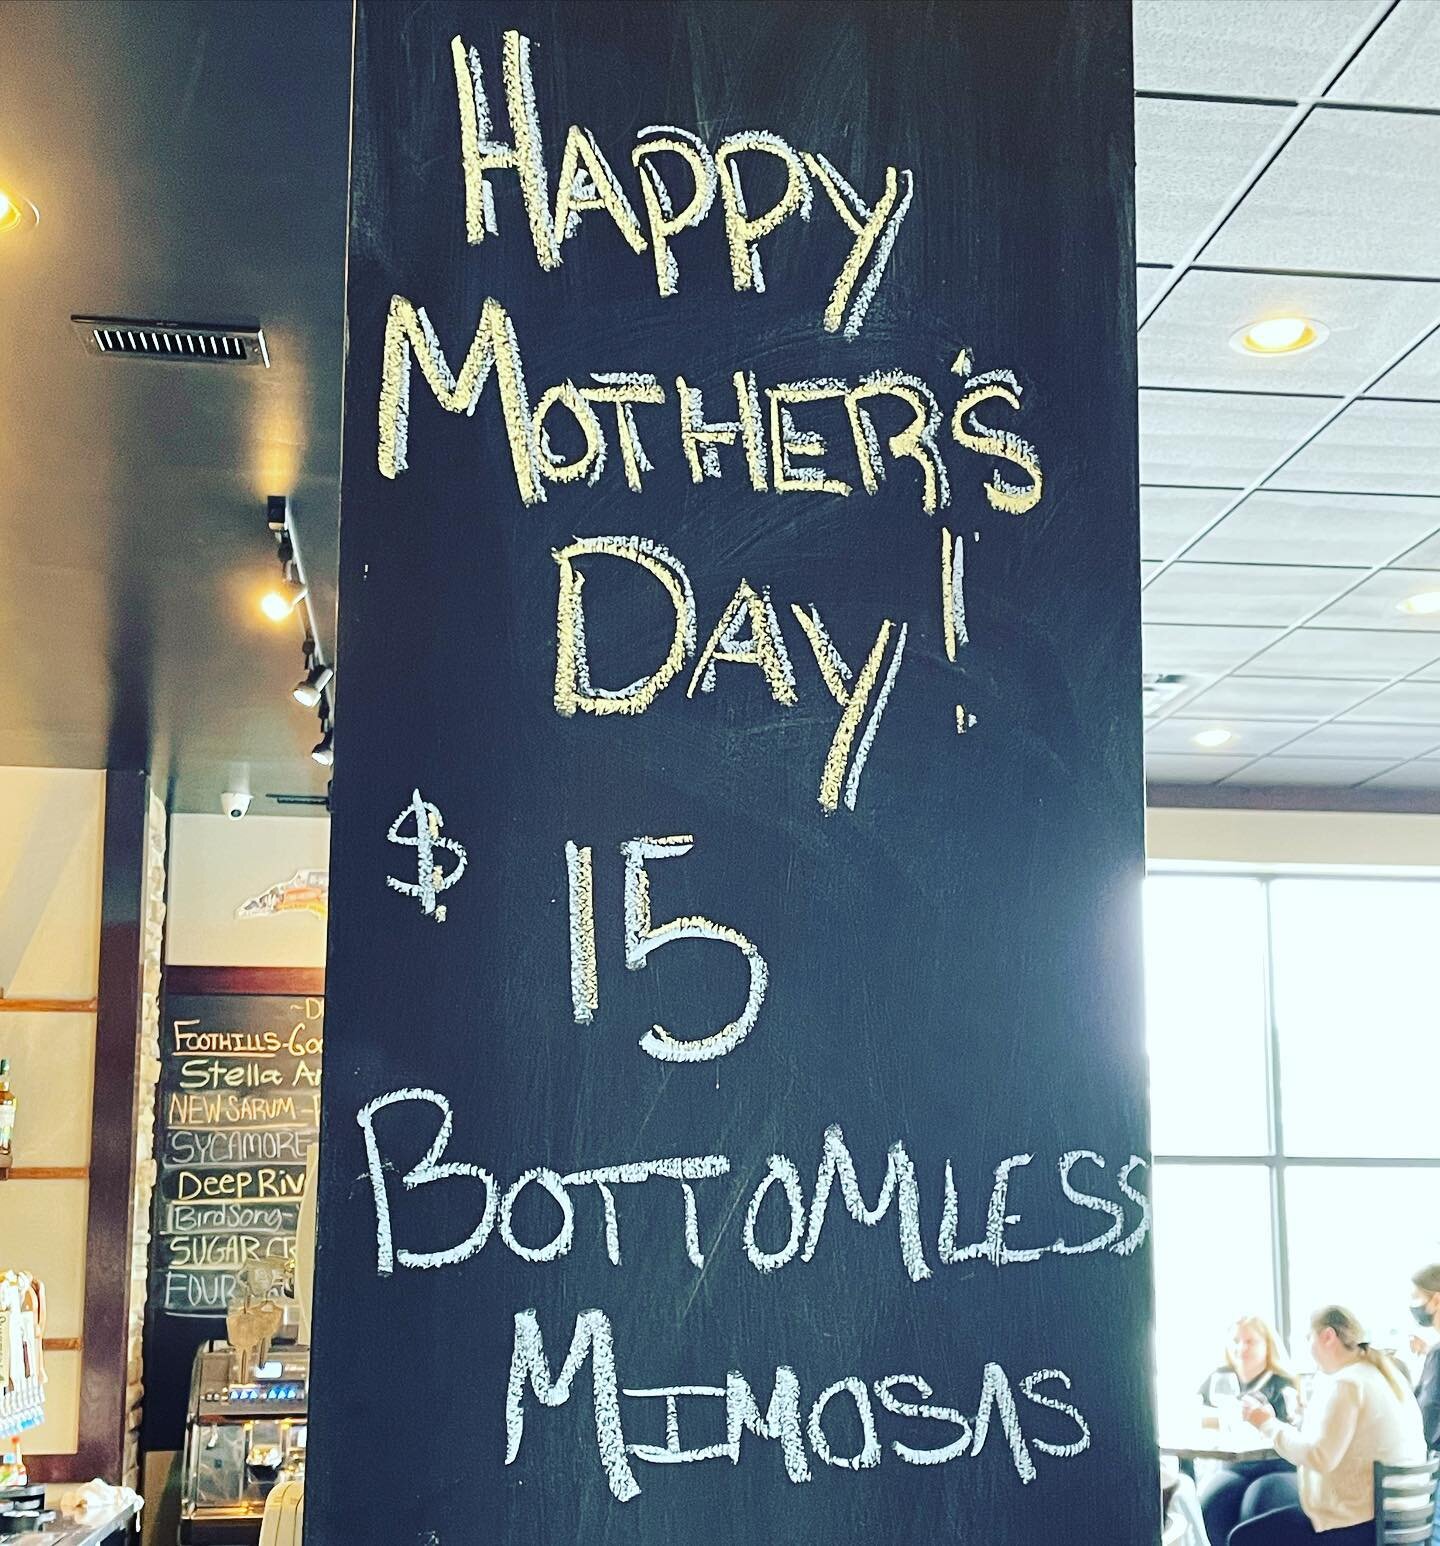 Happy Mother&rsquo;s Day to all the brilliant moms out there! Come see us at Melt for bottomless mimosas and delicious food! #cheers #mothersday 🥂